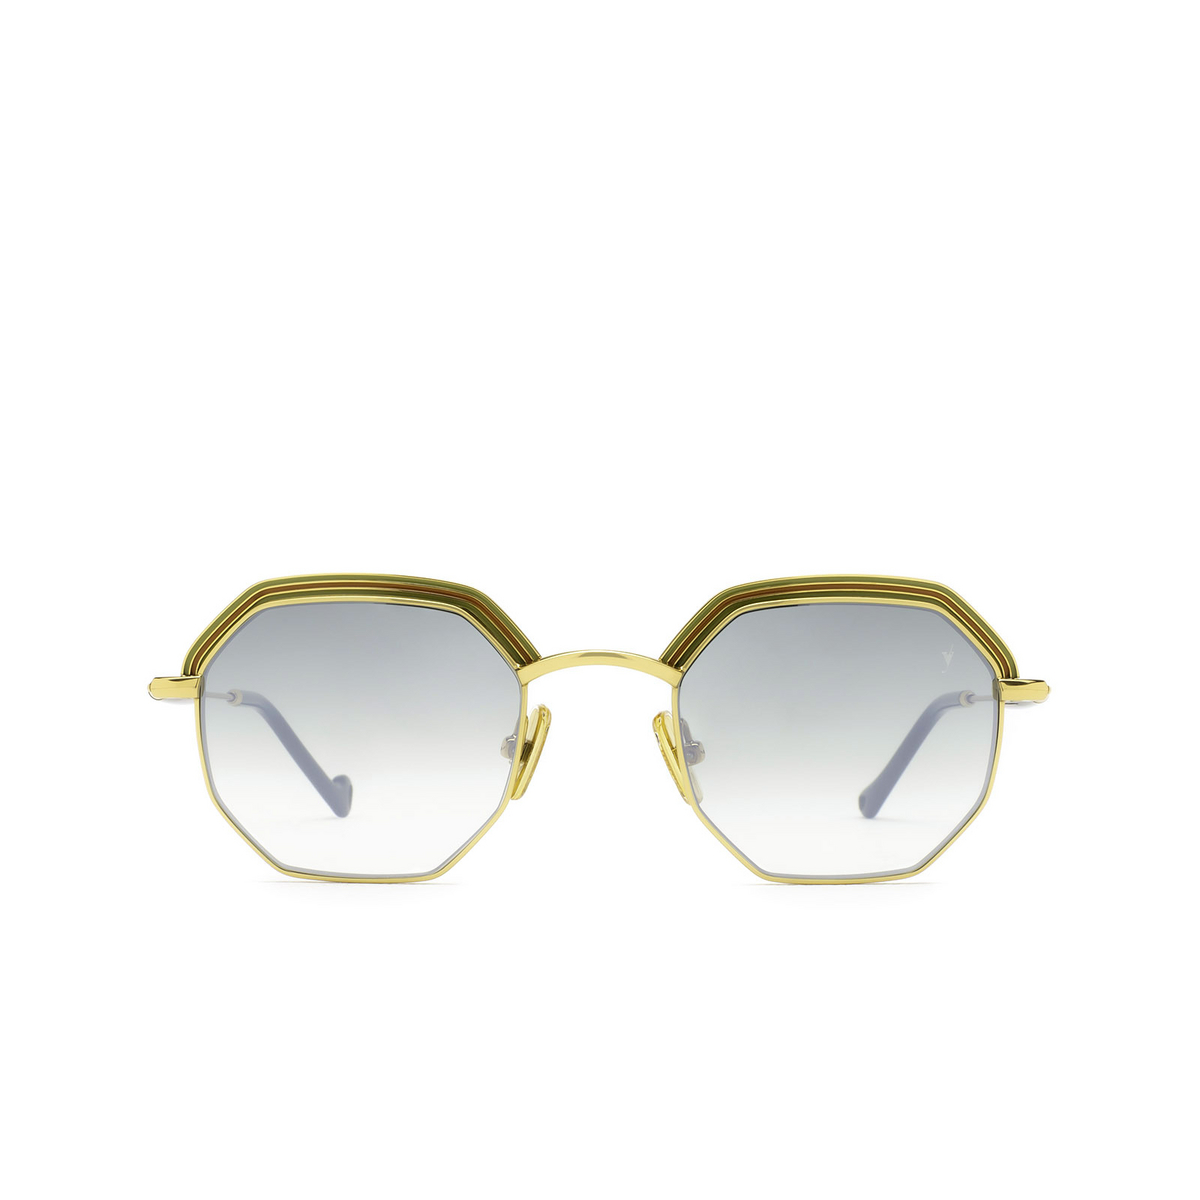 Eyepetizer® Irregular Sunglasses: Air Sun color Green And Gold C.4-25F - front view.